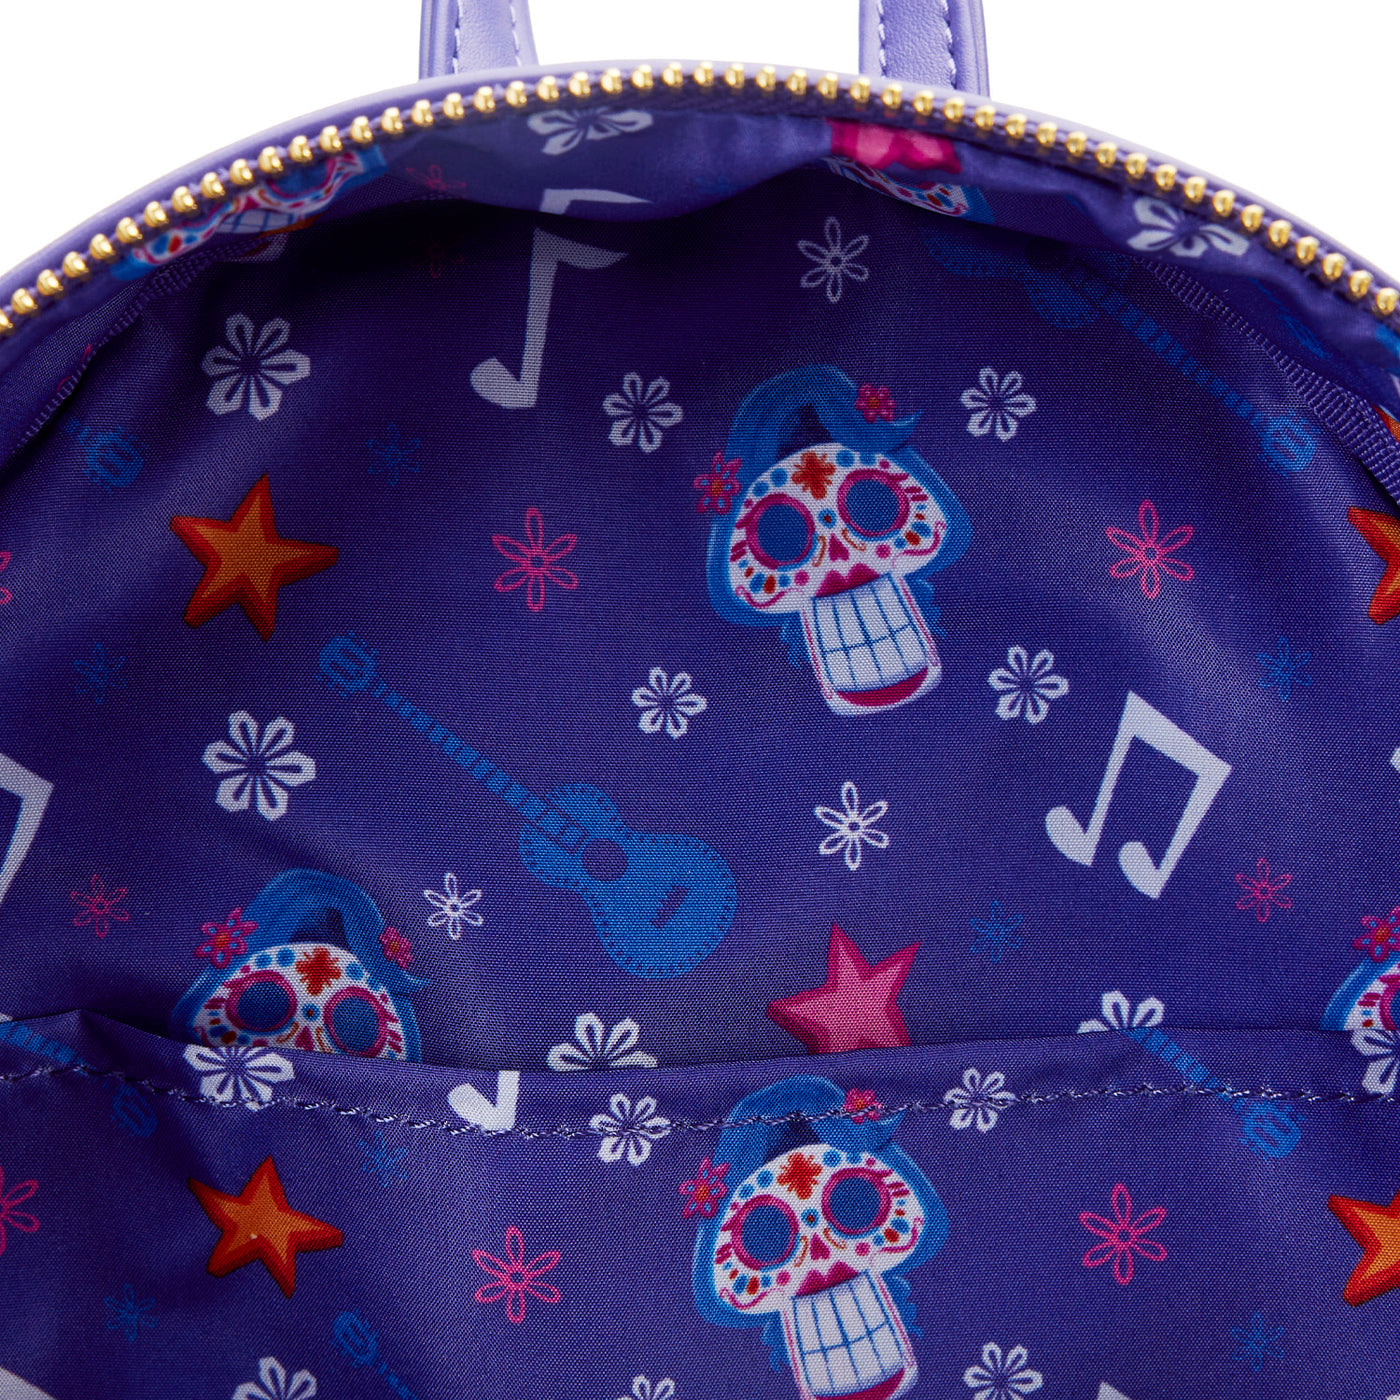 Disney Pixar Moments Coco Miguel & Hector Performance Mini Backpack